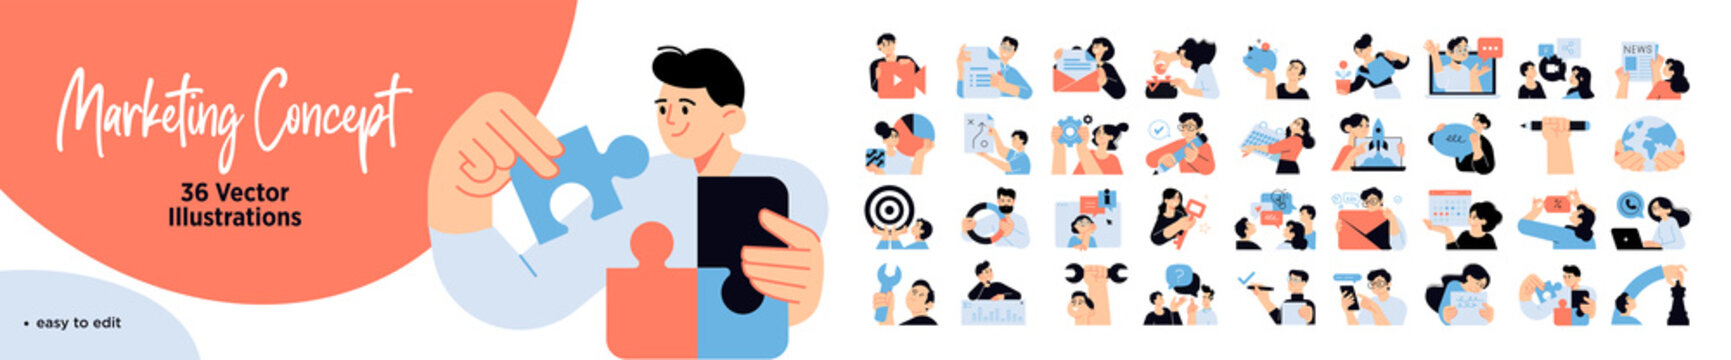 Set of marketing people illustrations. Flat design vector concepts of business marketing, strategy, planning, digital advertising, social media and communication.